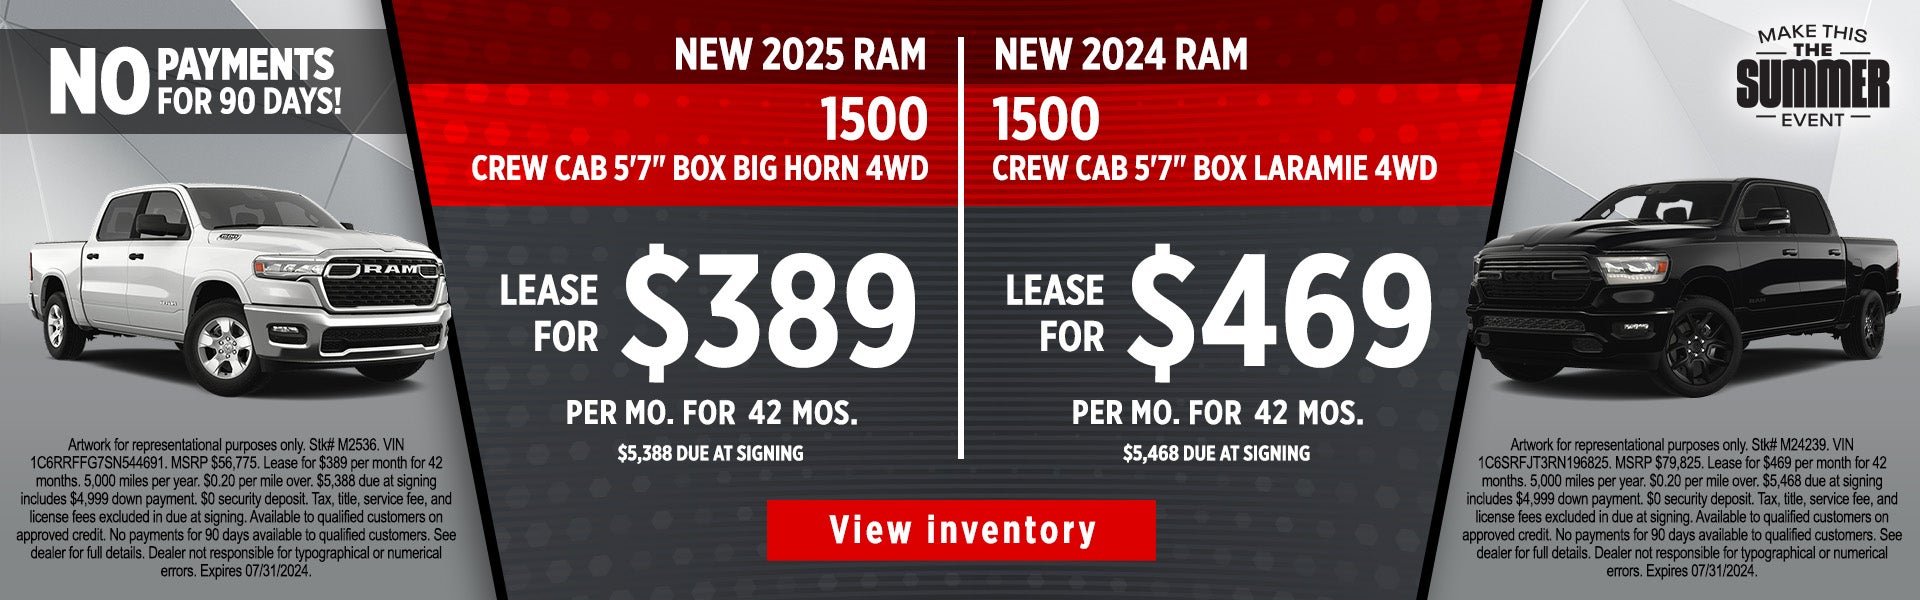 July Lease Special 3 - New Ram 1500